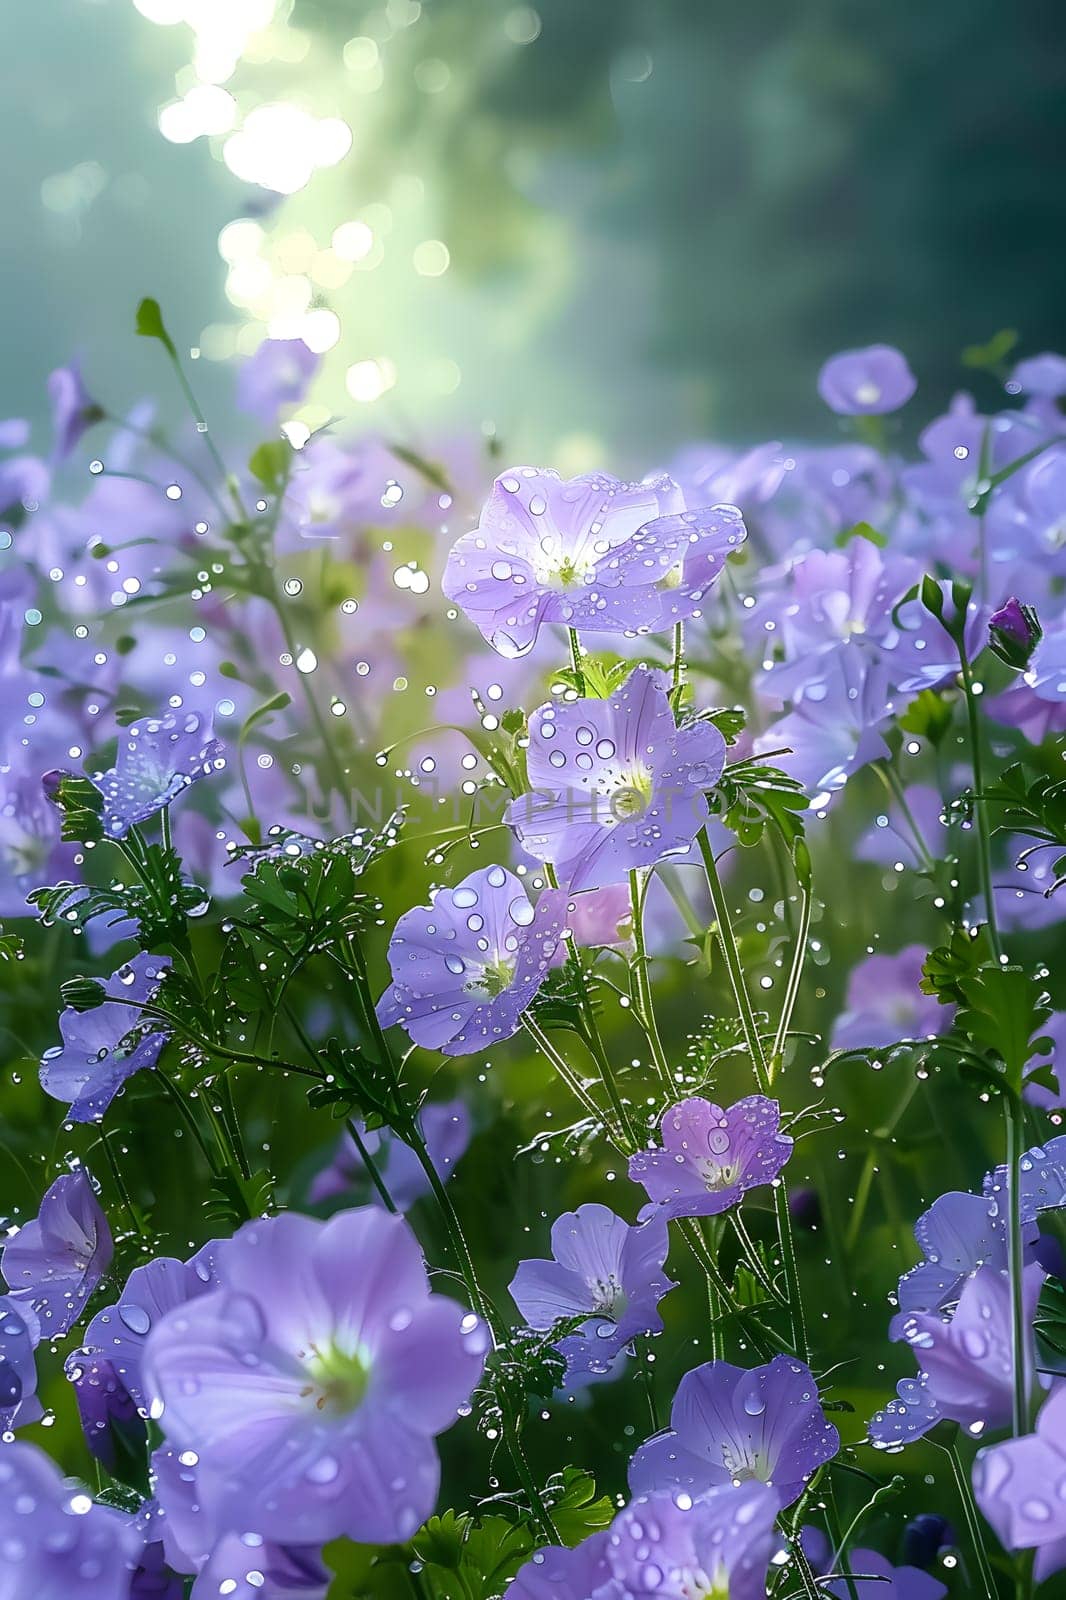 Purple flowers with dewy petals in a lush groundcover by Nadtochiy